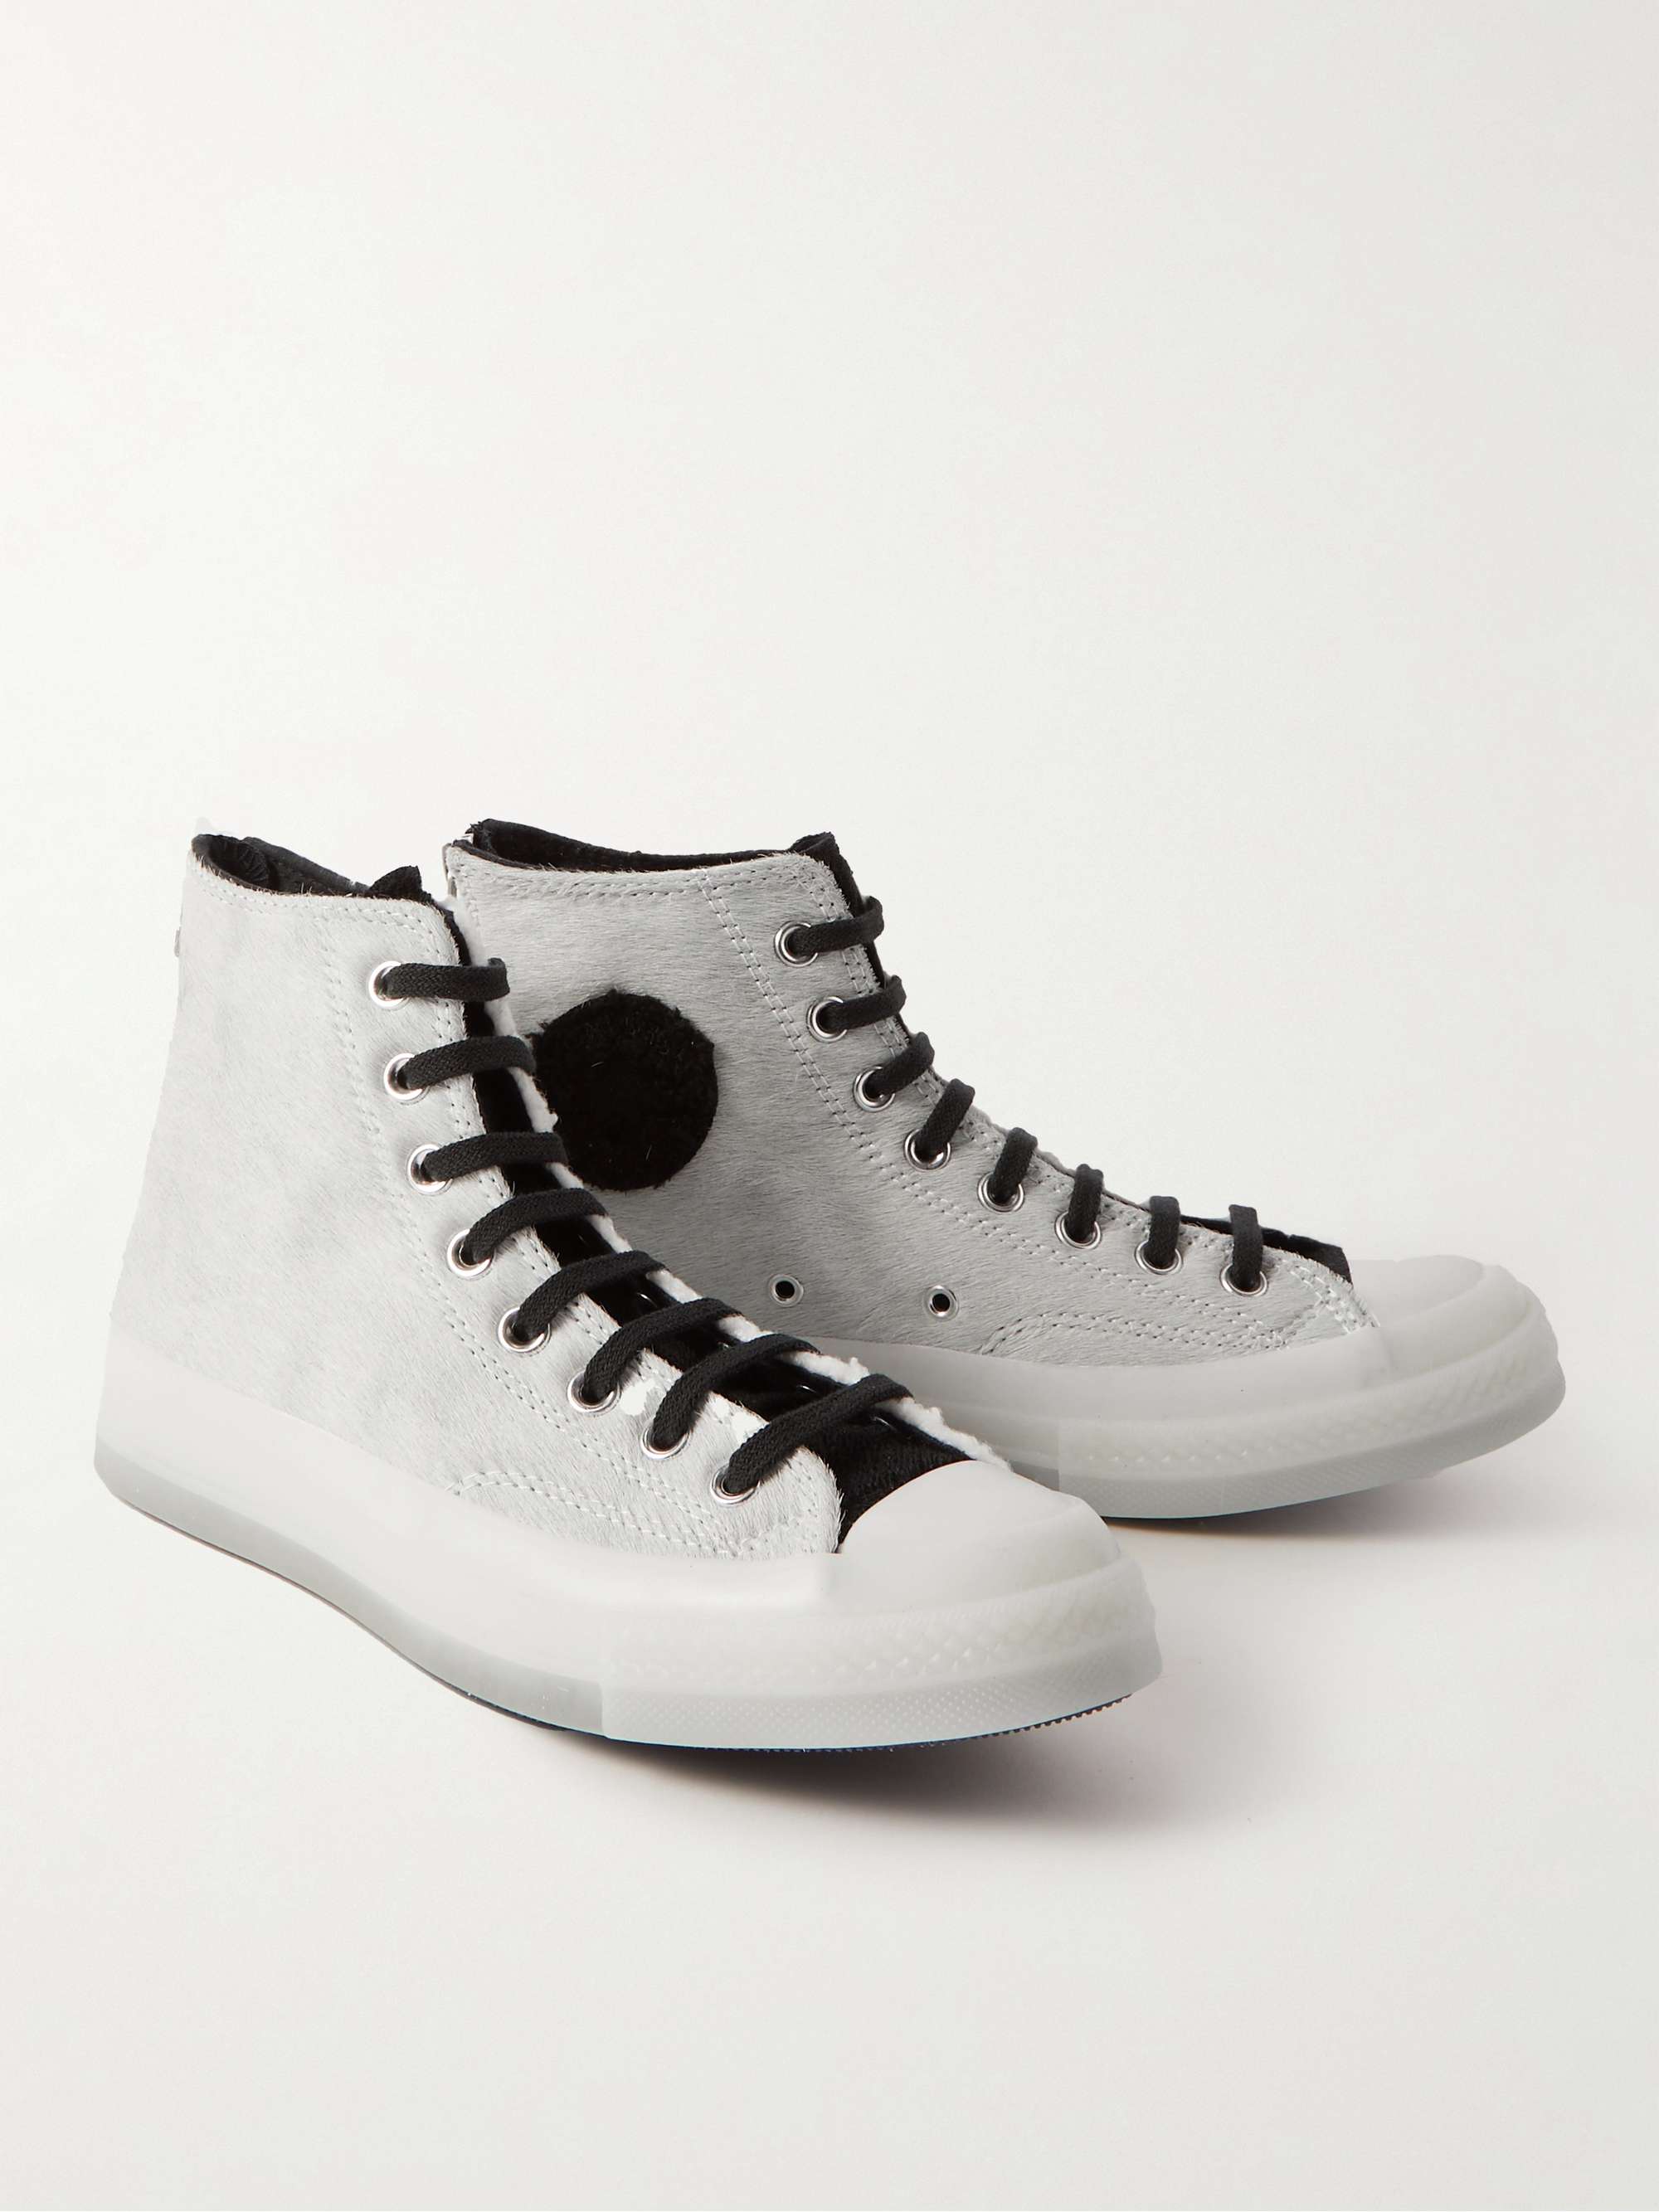 White + Clot Chuck 70 Faux Shearling and Calf Hair High-Top Sneakers |  CONVERSE | MR PORTER